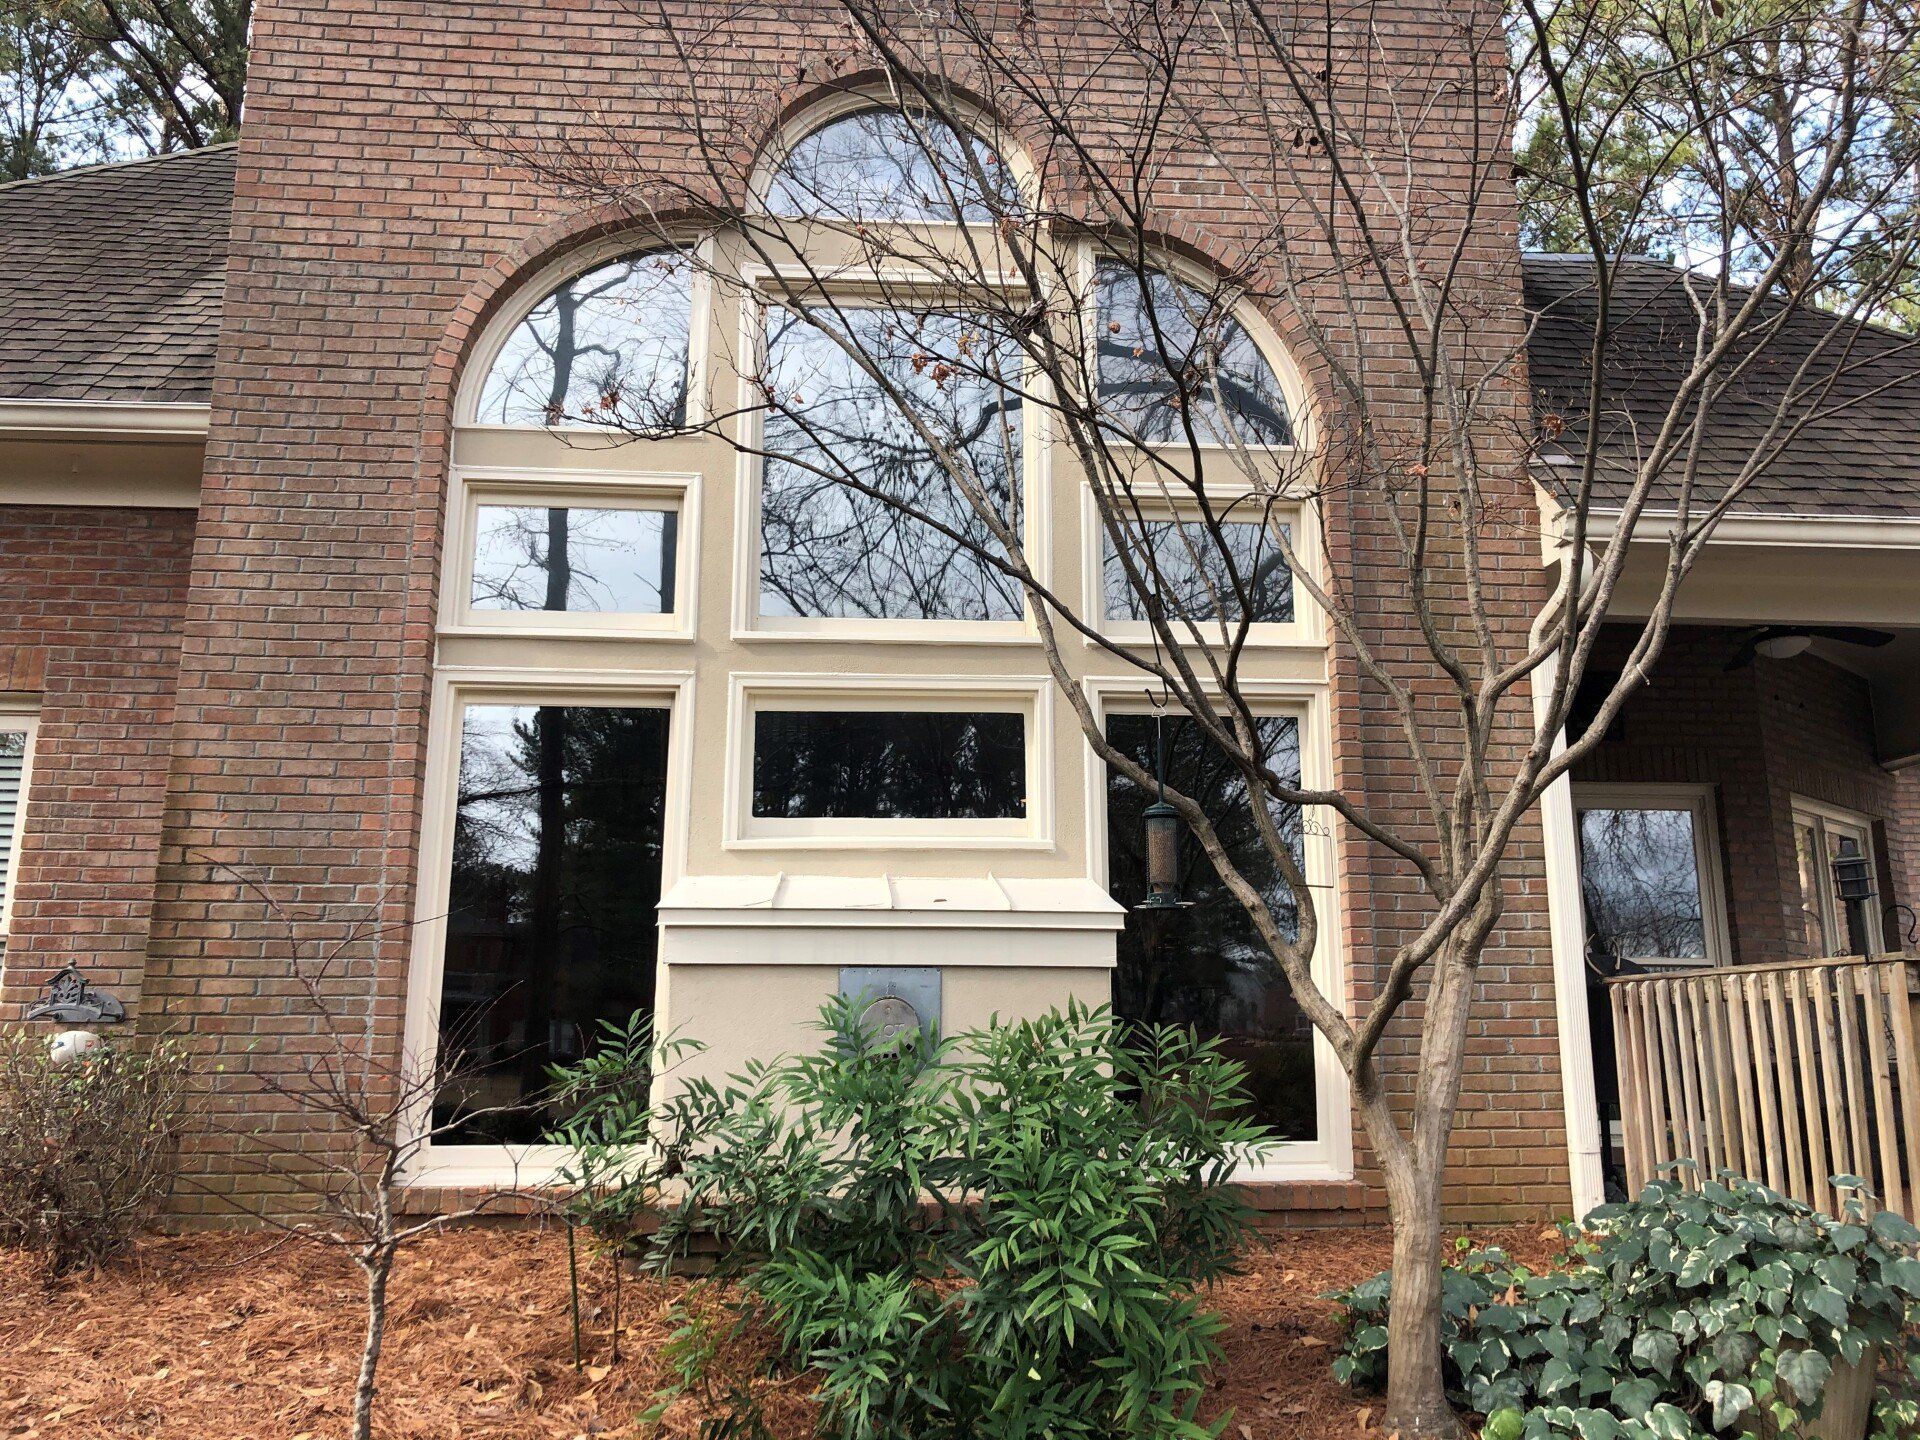 SPF Crystal Clear Tint installed to home windows  in February 2021 blocking UV-Sun Fade while becoming more energy efficient. SPF Residential  Tint in Wynn Lakes AL